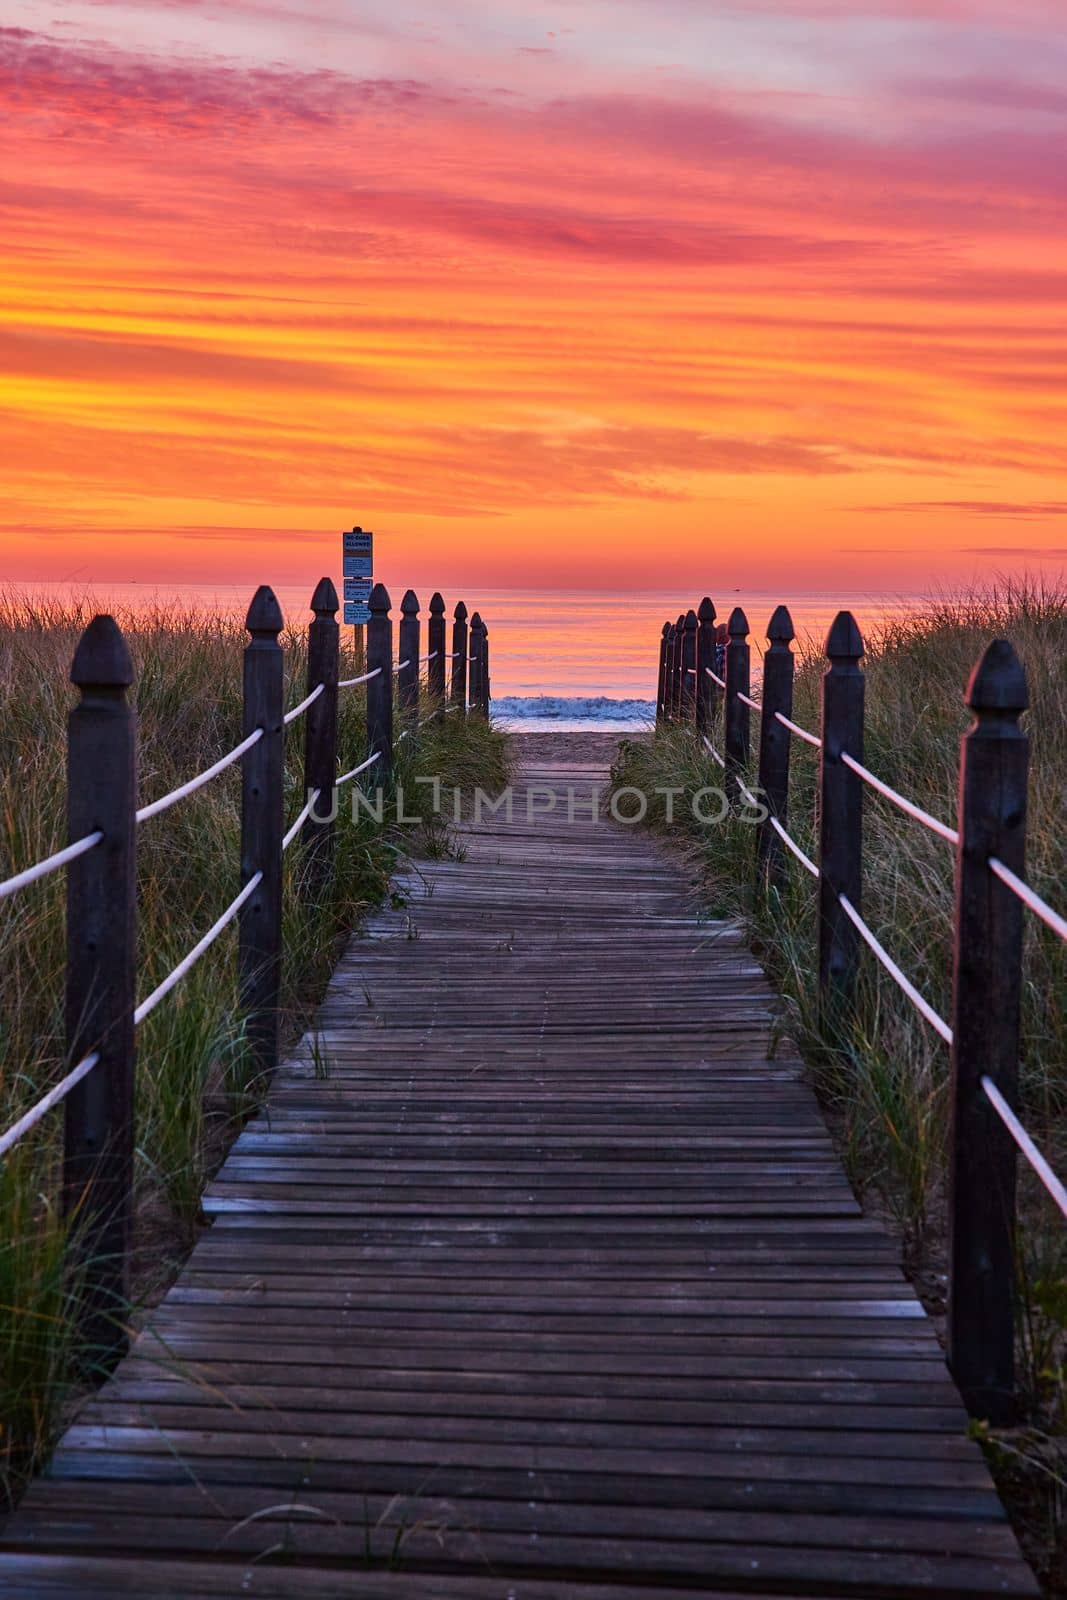 Image of Orange and red sunrise light with straight boardwalk path guiding you to beach